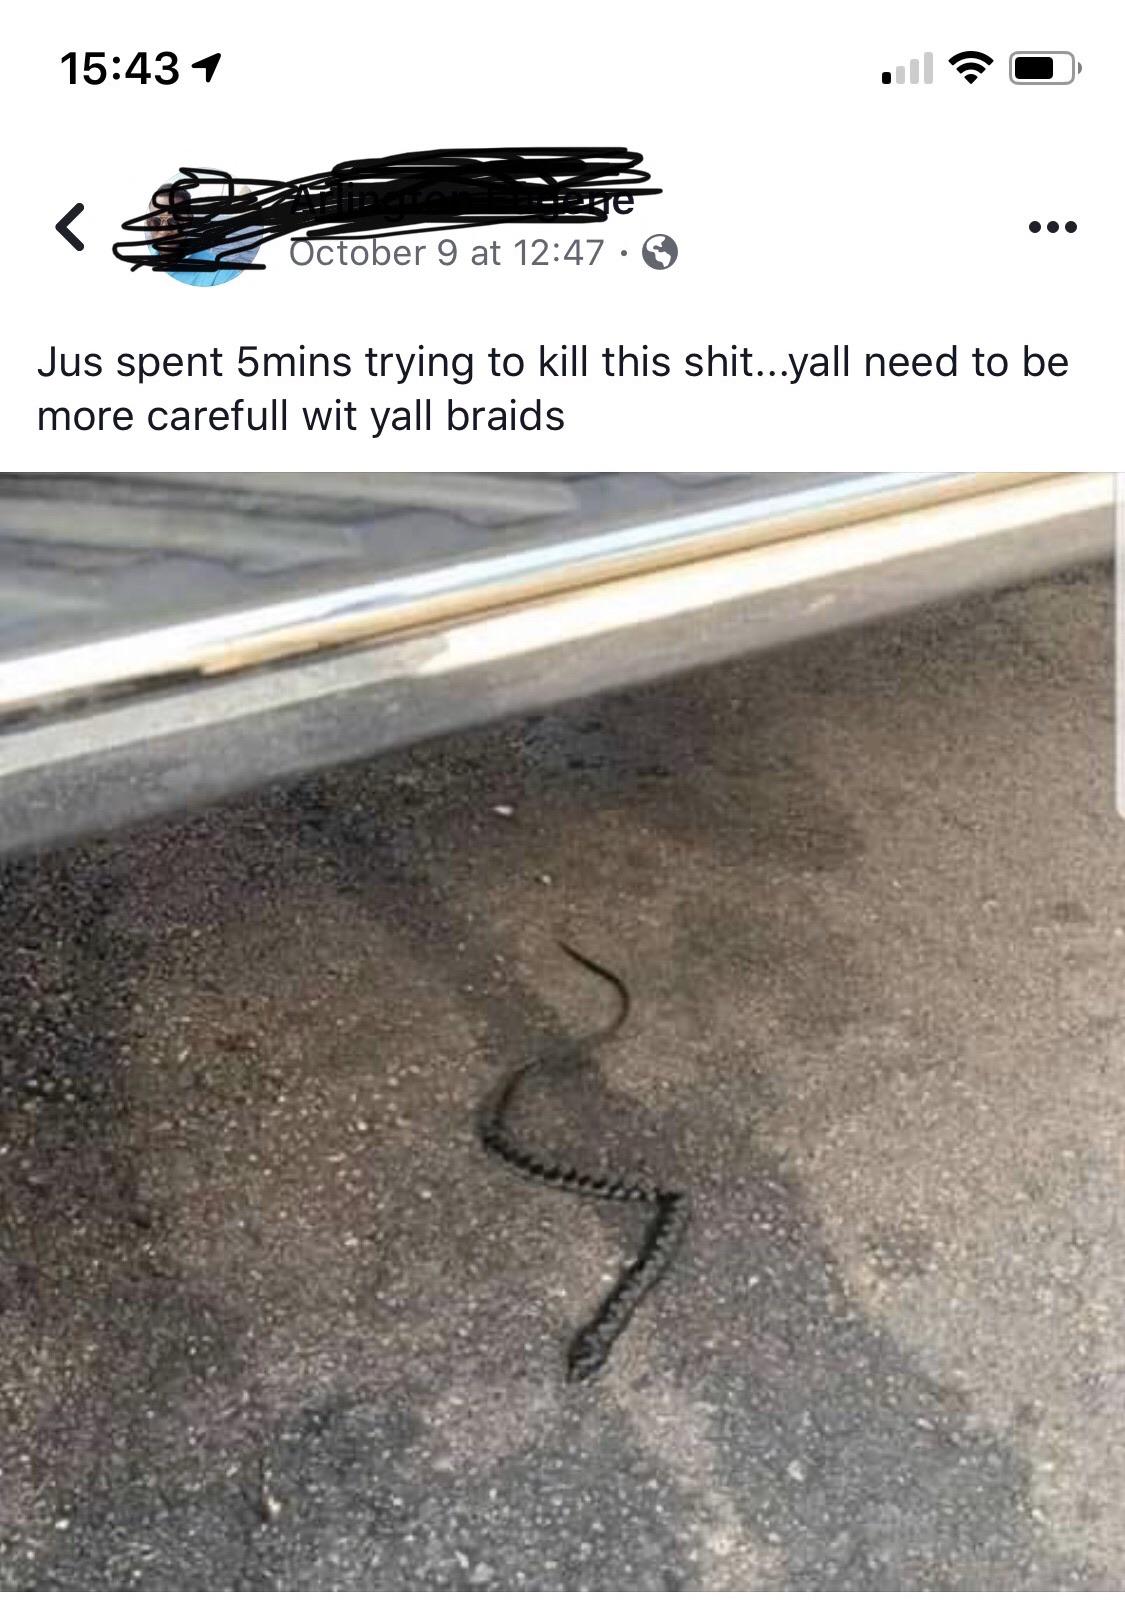 at Jus spent 5mins trying to kill this shit...yall need to be more carefull wit yall braids